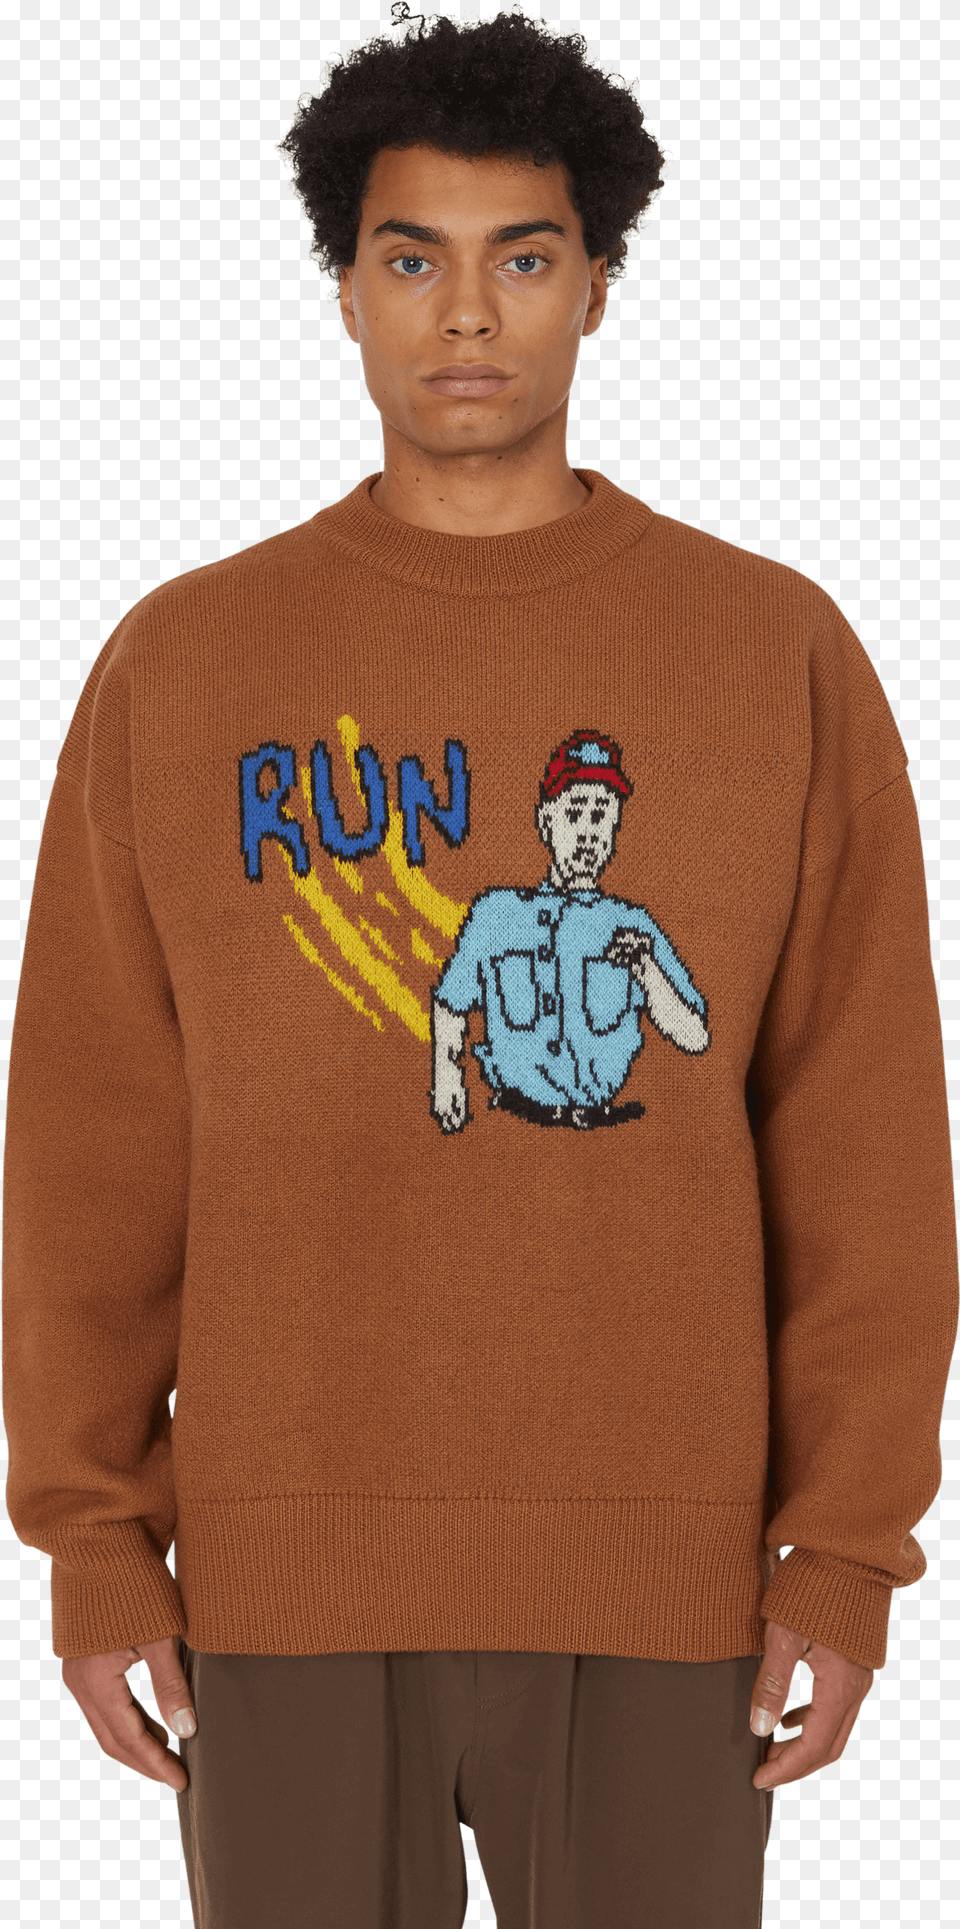 Forrest Gump Jacquard Knitwear Sweater Sweater, Clothing, Sweatshirt, Baby, Hoodie Free Png Download